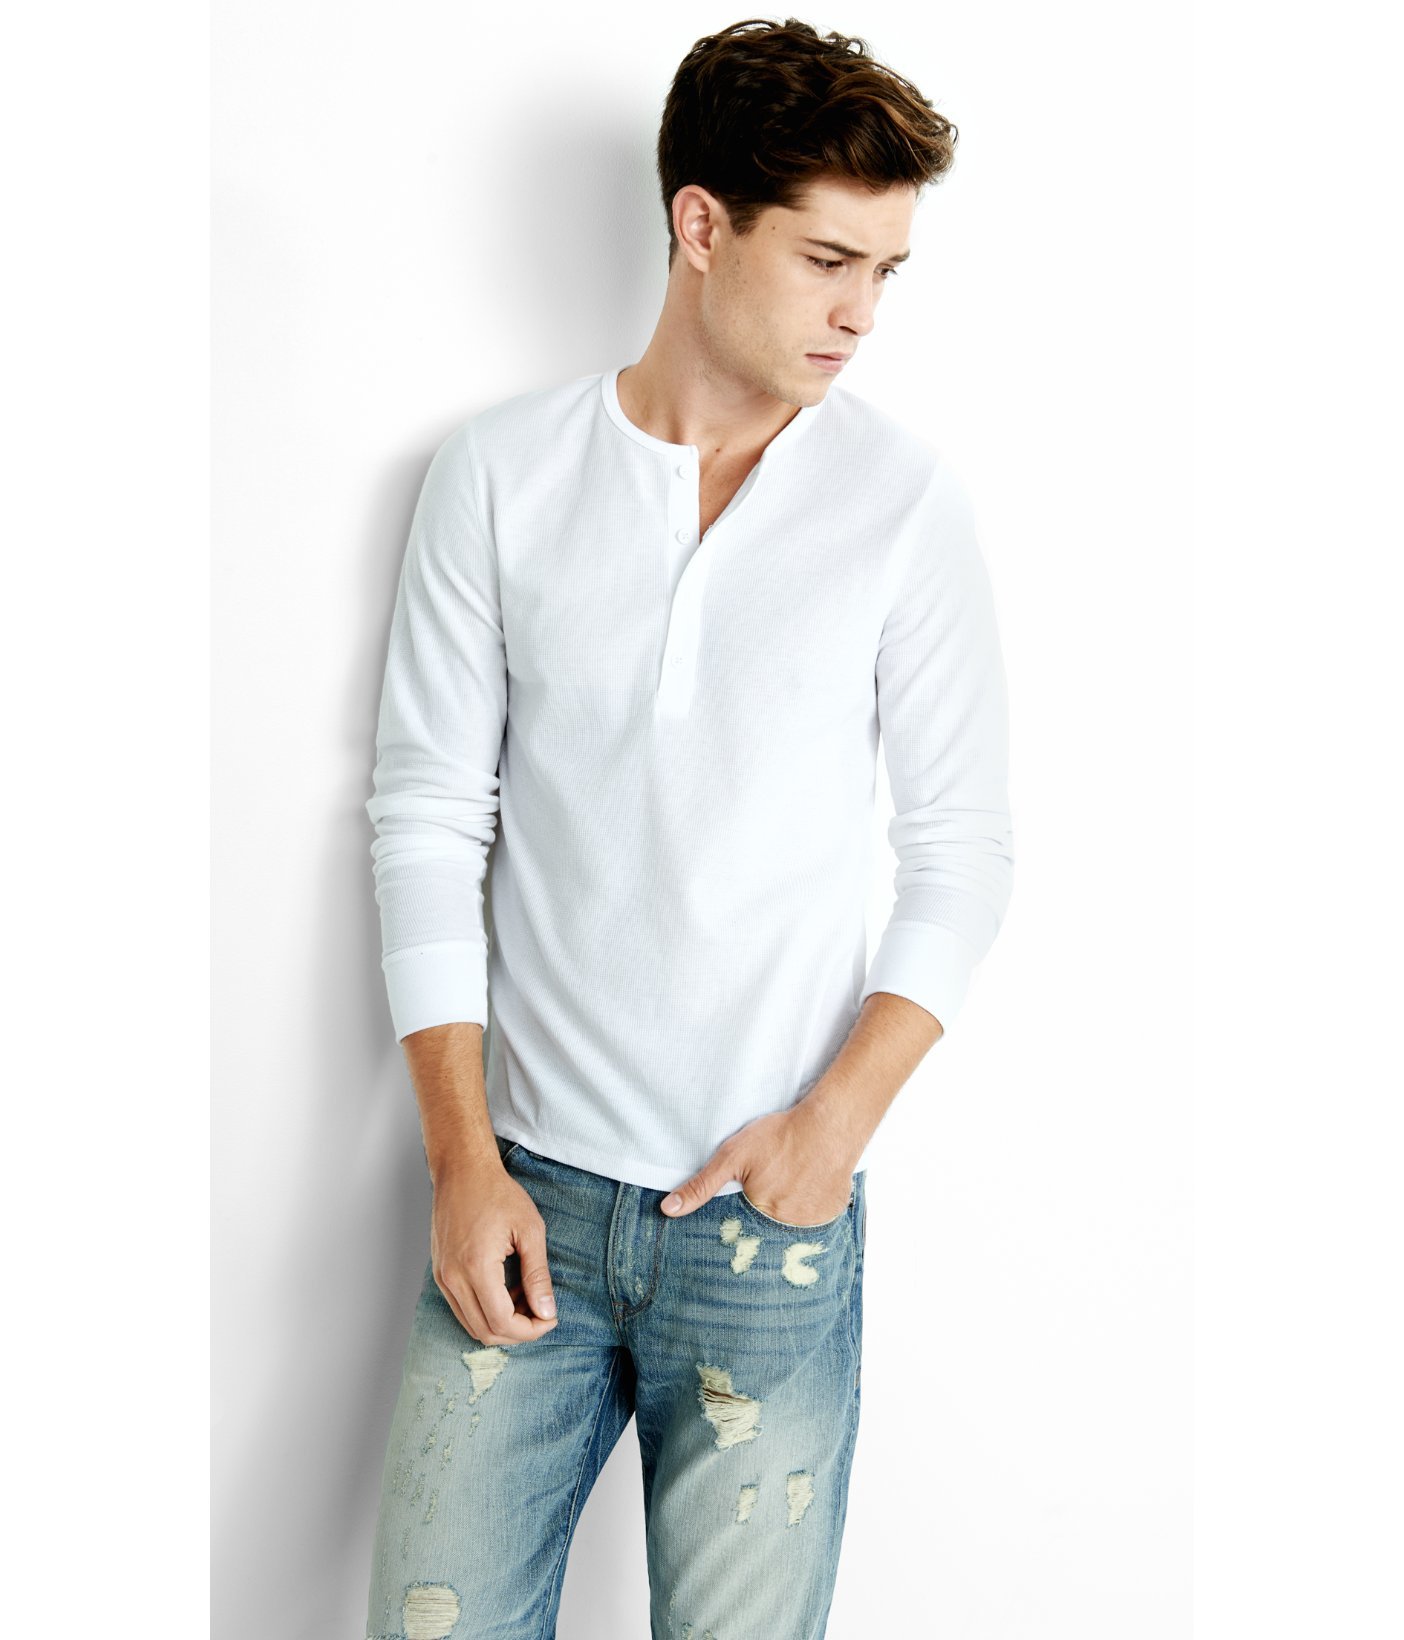 Express Long Sleeve Waffle Knit Henley T-shirt in White for Men - Lyst